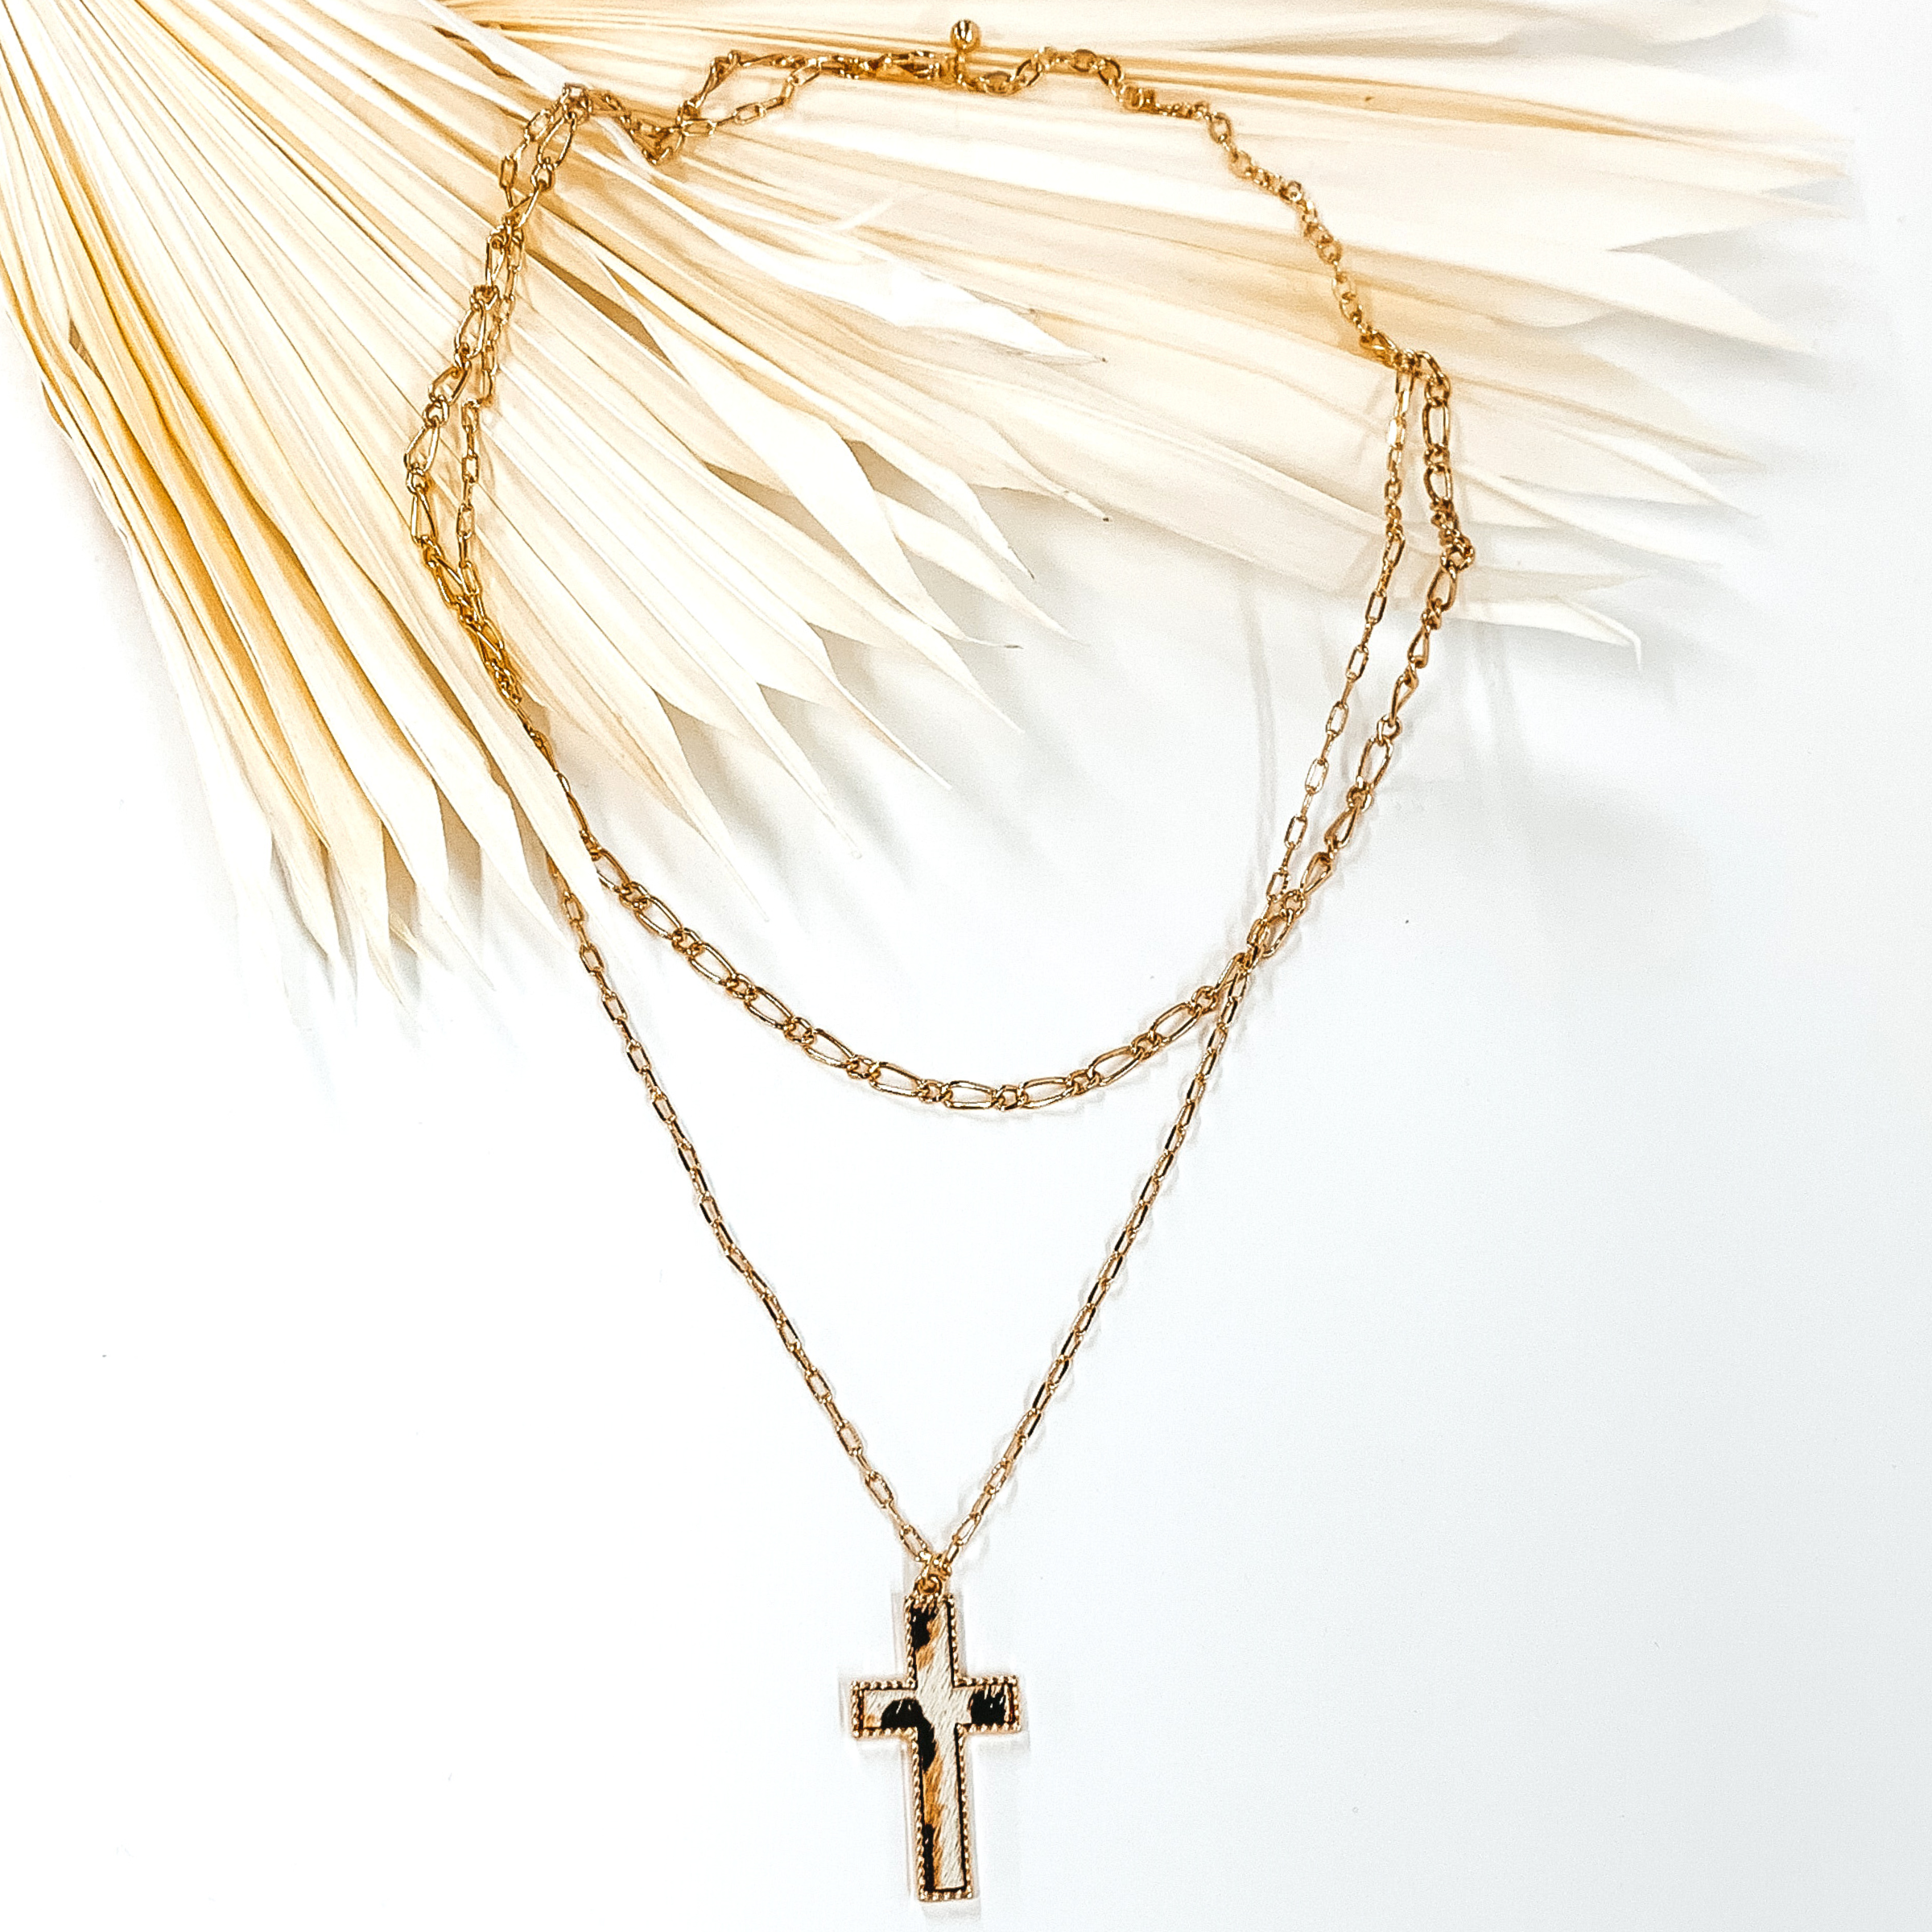 Gold paperclip doubled chain with a cross pendant. The pendant has a white hide inlay with an animal print. This necklace is pictured laying on cream leaf on a white background.